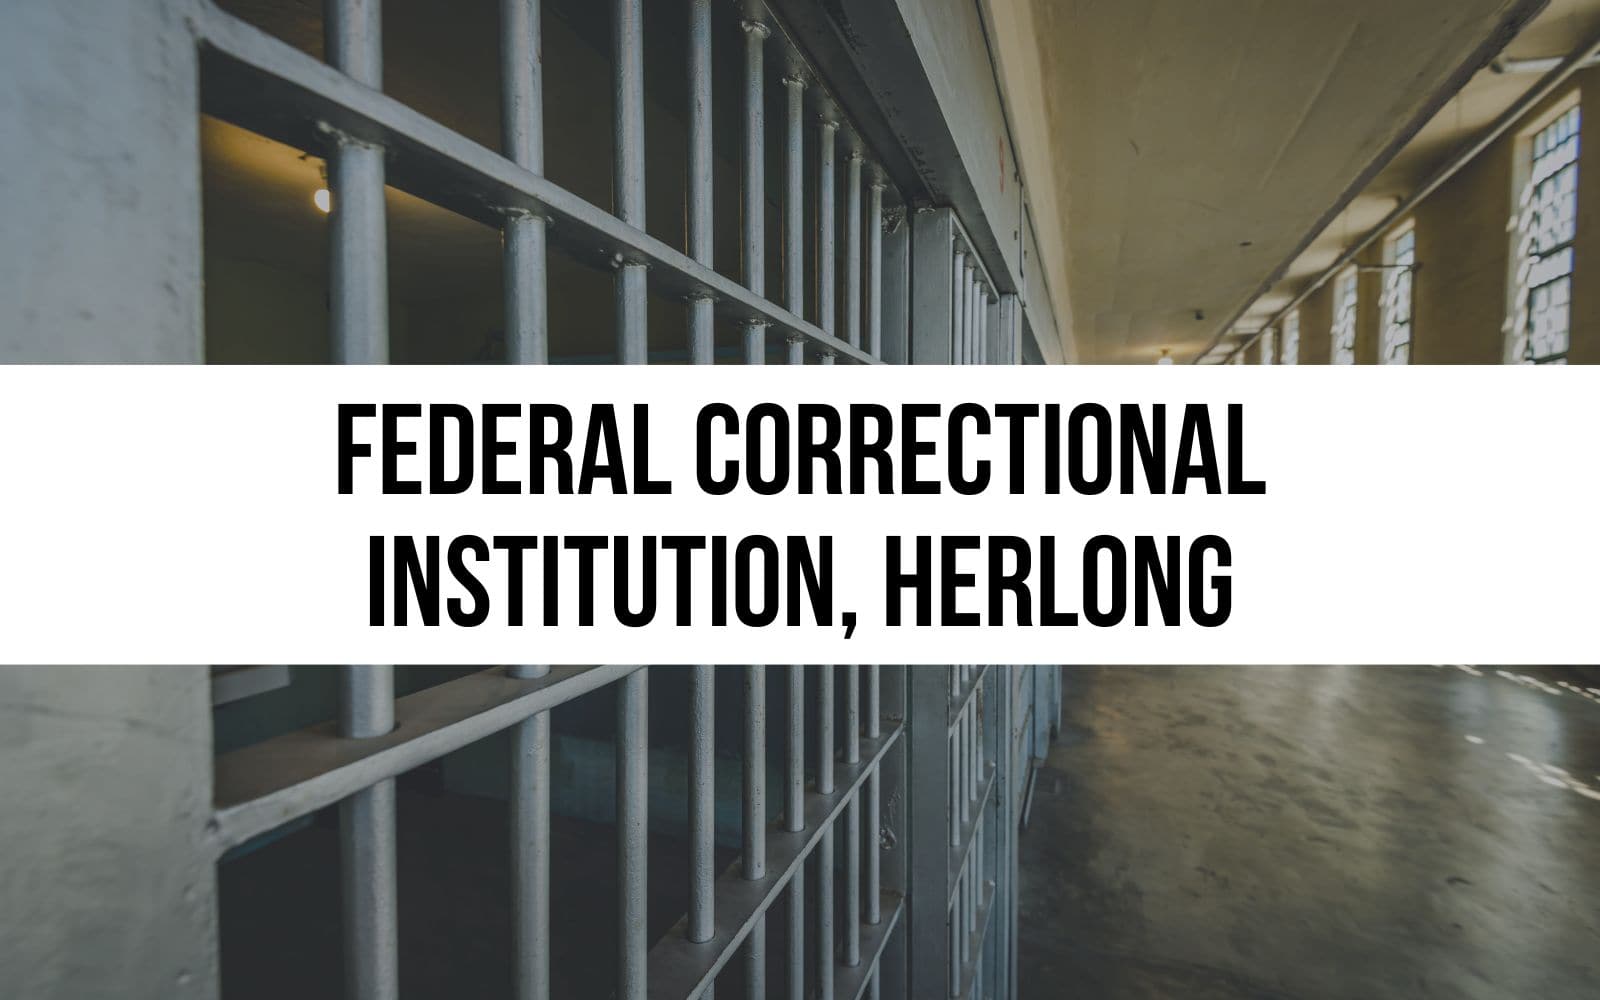 Federal Correctional Institution, Herlong